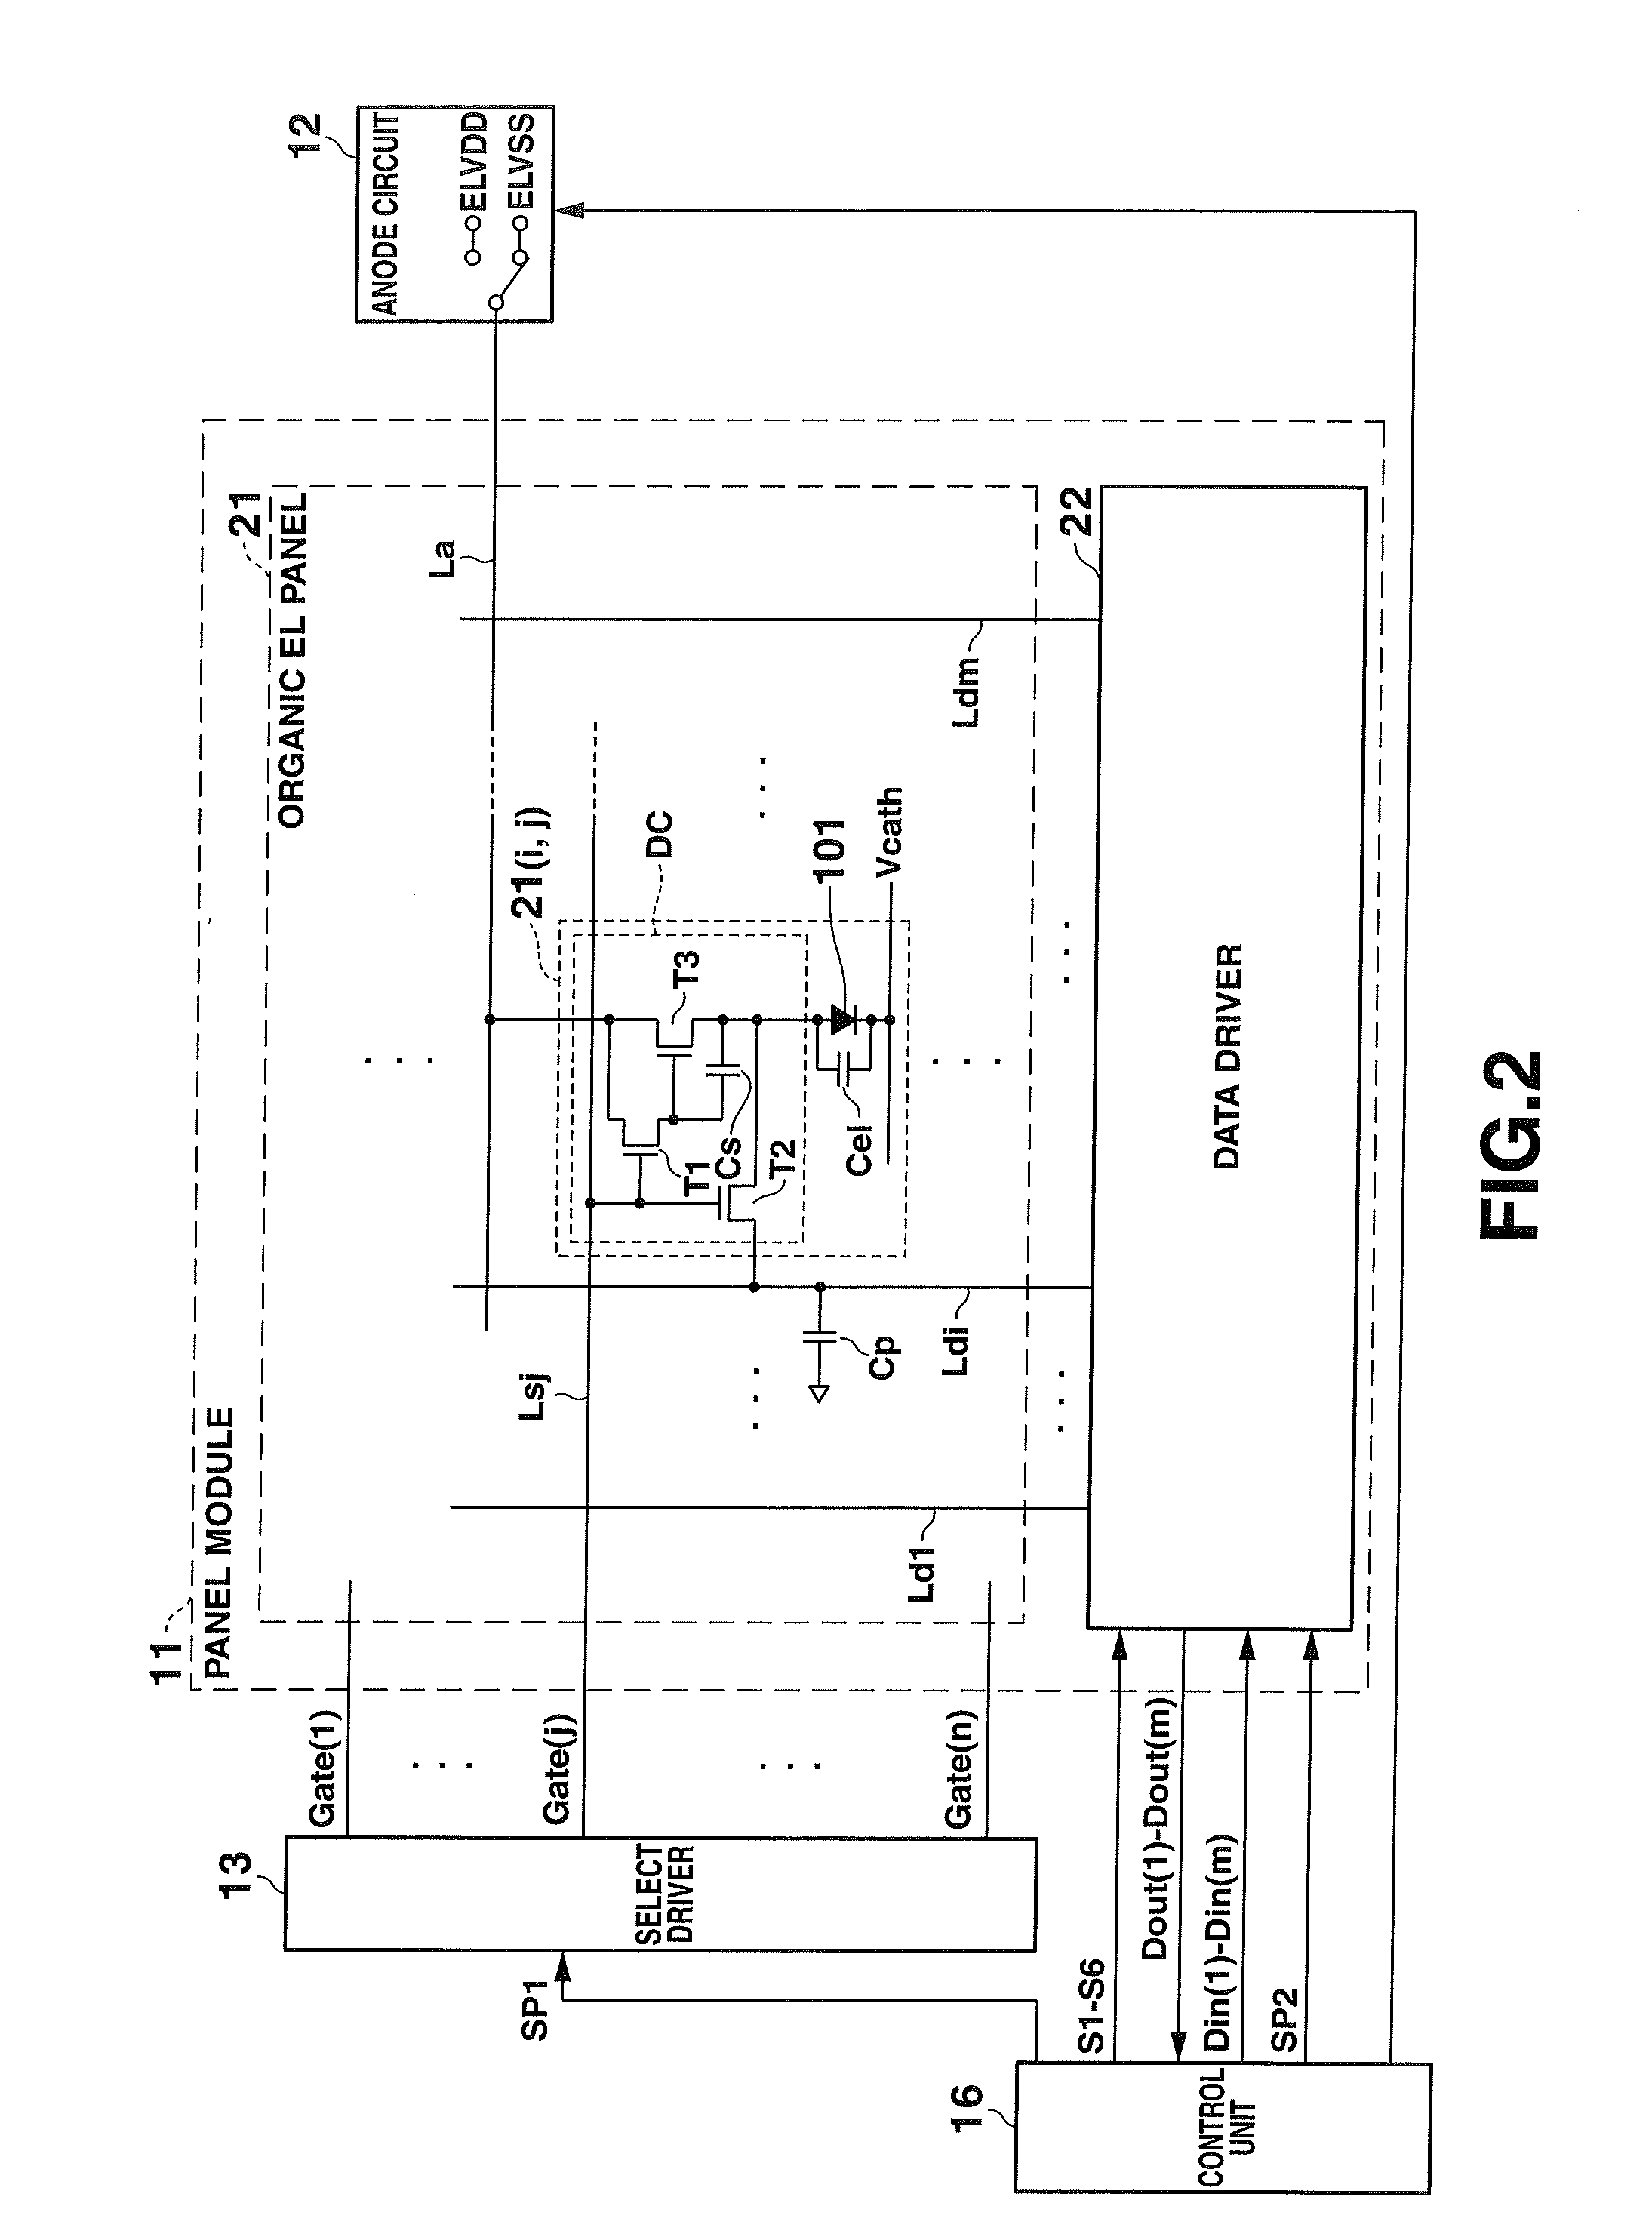 Light emitting device and a drive control method for driving a light emitting device